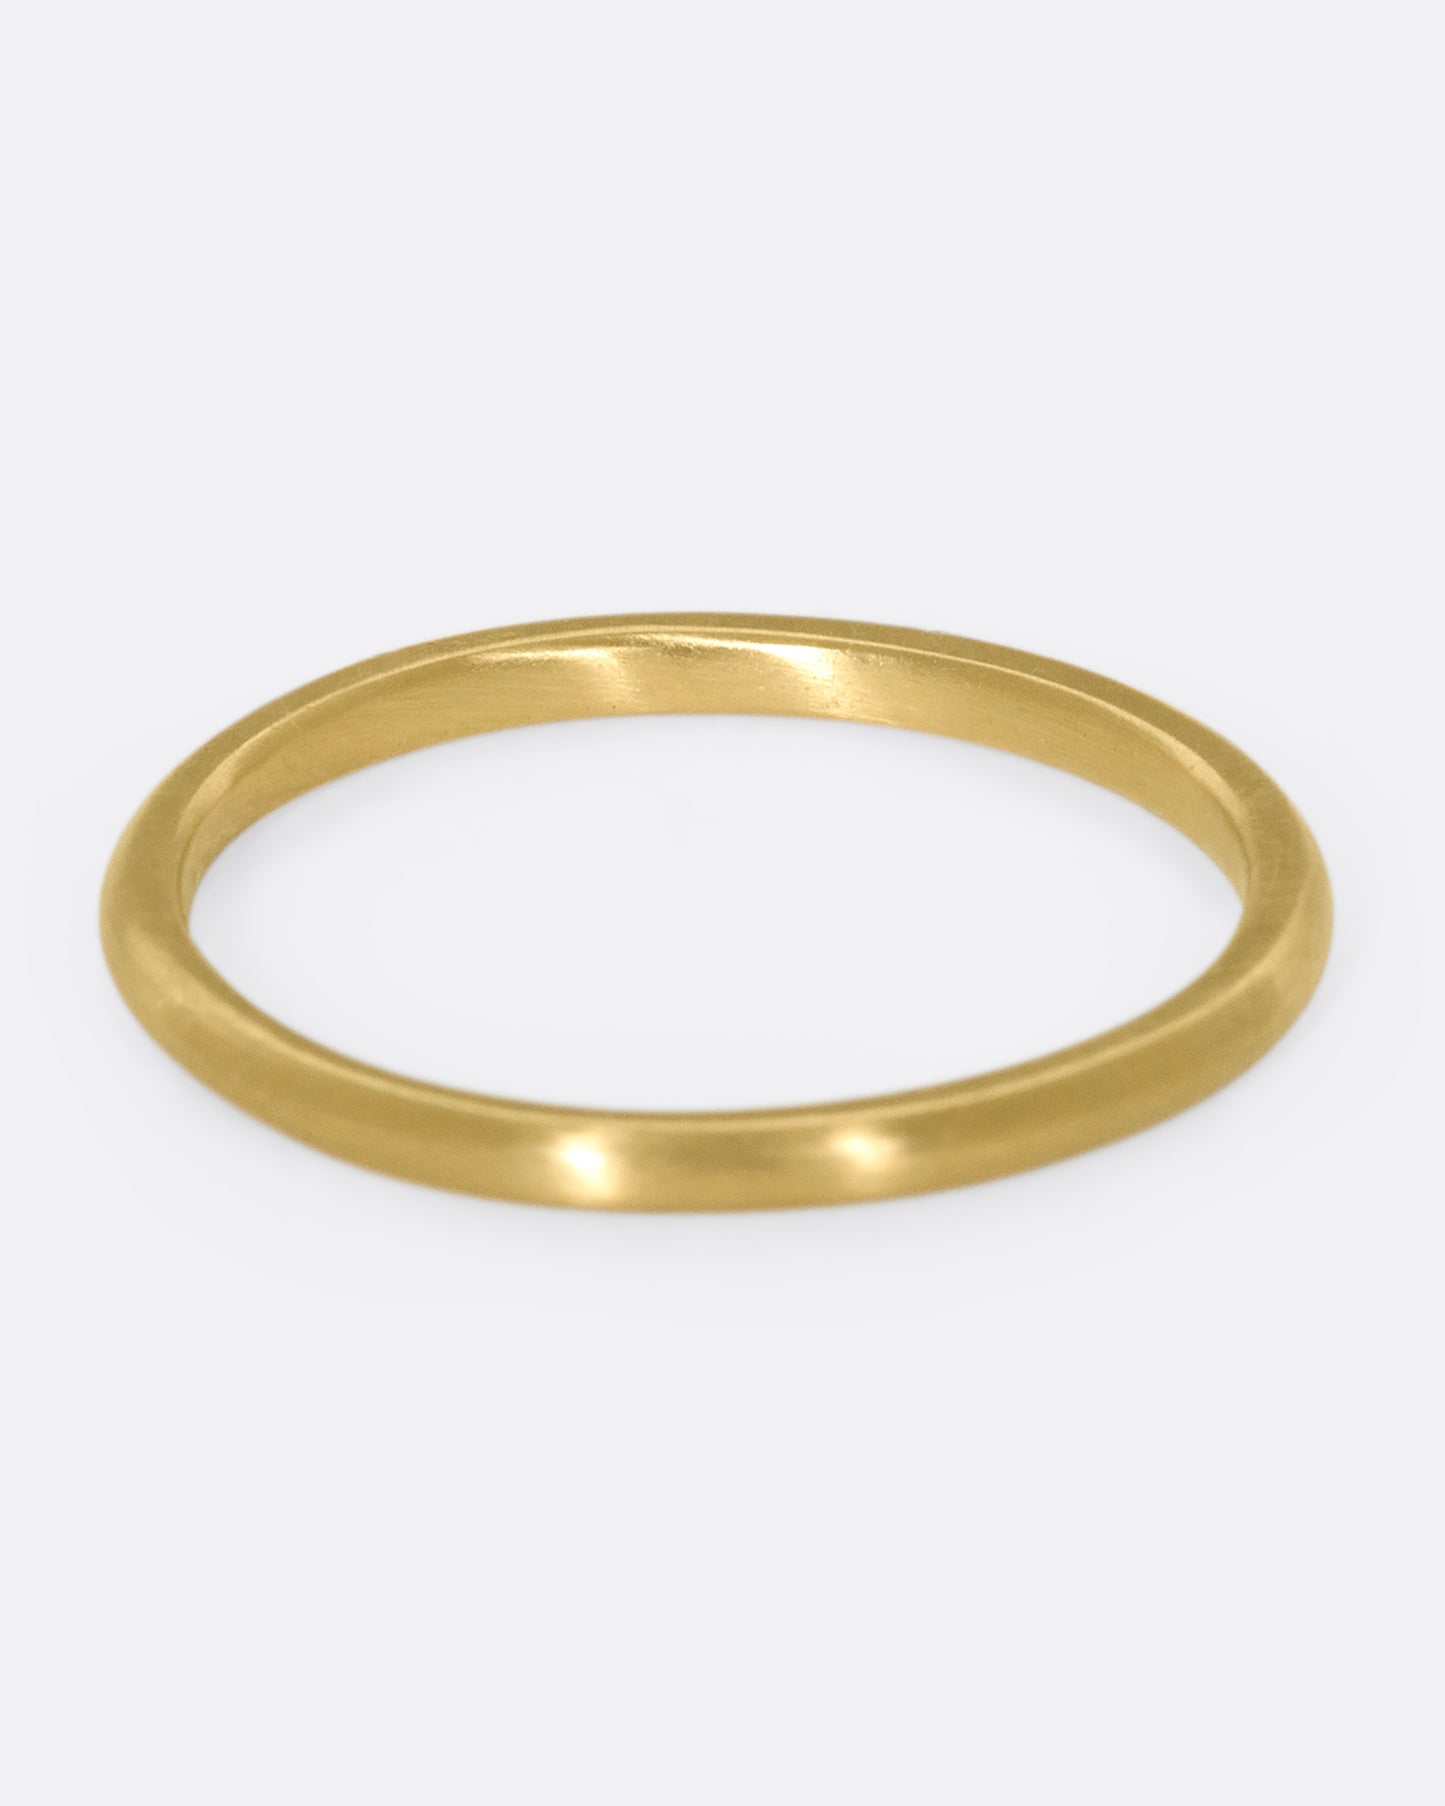 This 10k gold stacking ring features two flush-set white diamonds that sink into the soft gold band